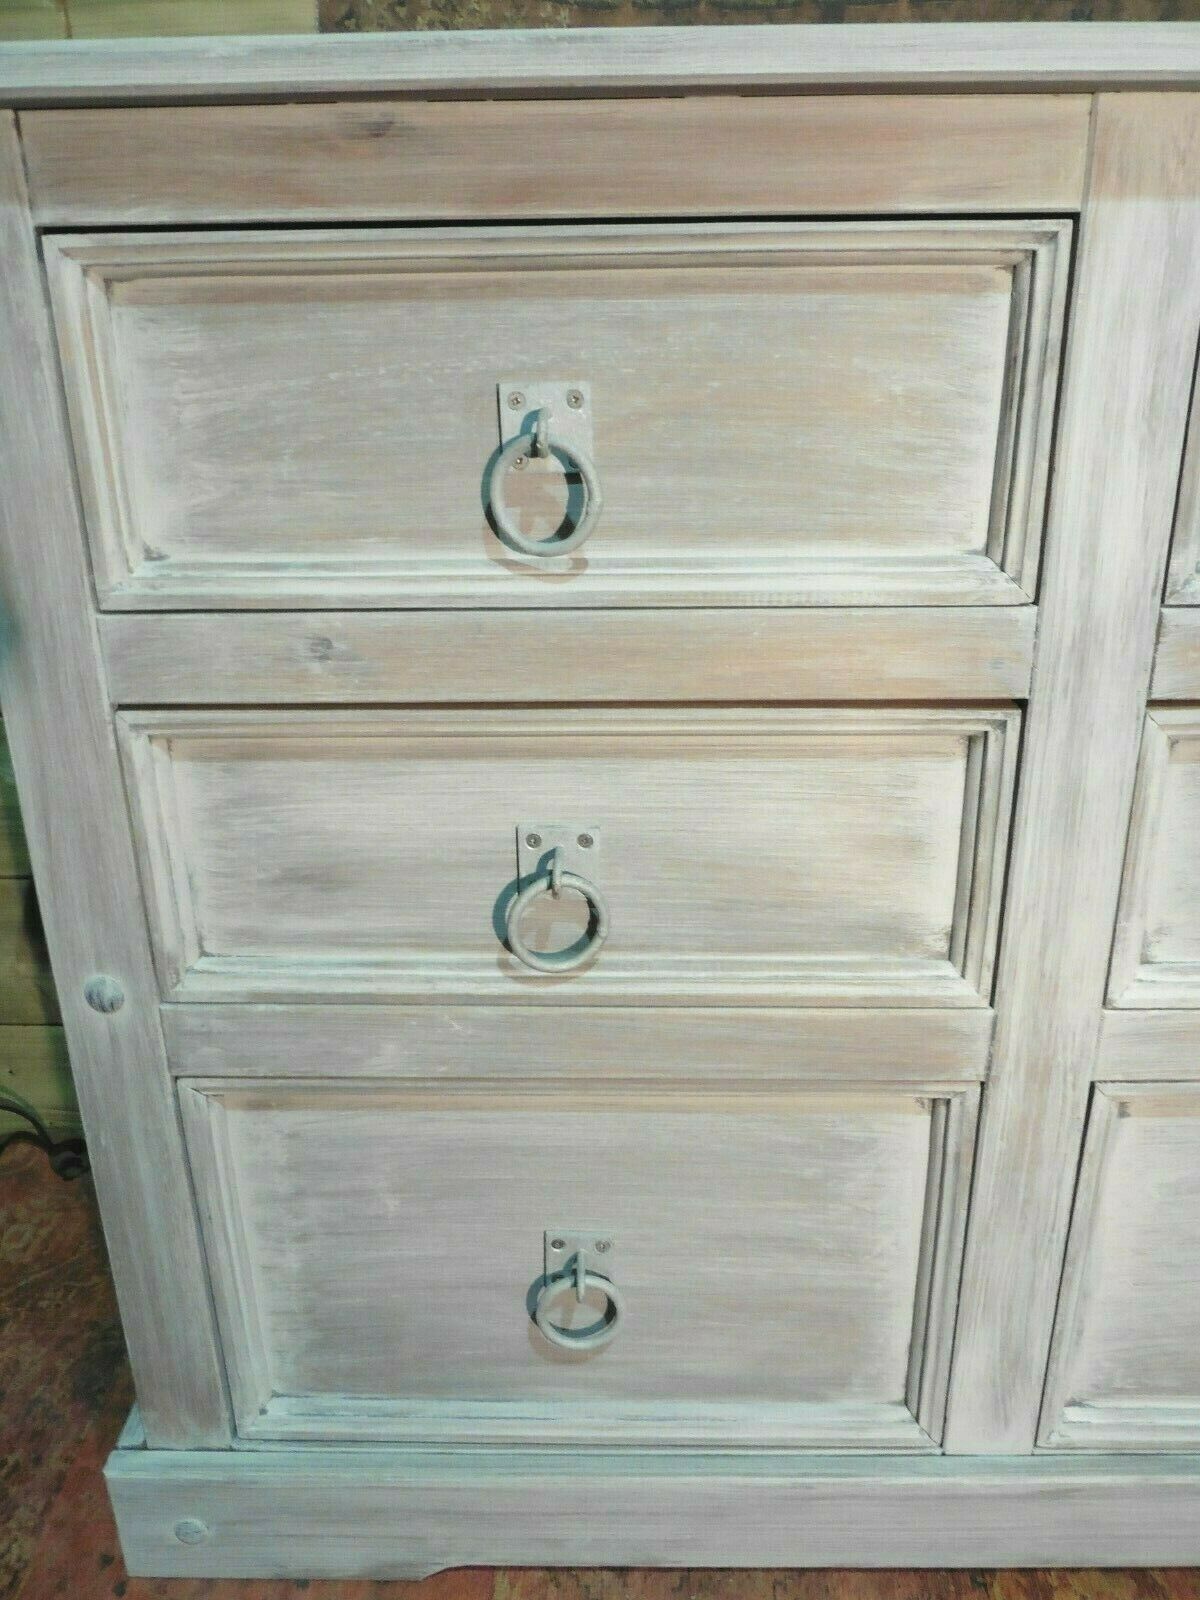 422.....Large Modern Upcycled Chest Of Drawers / Pine Bank Of Drawers